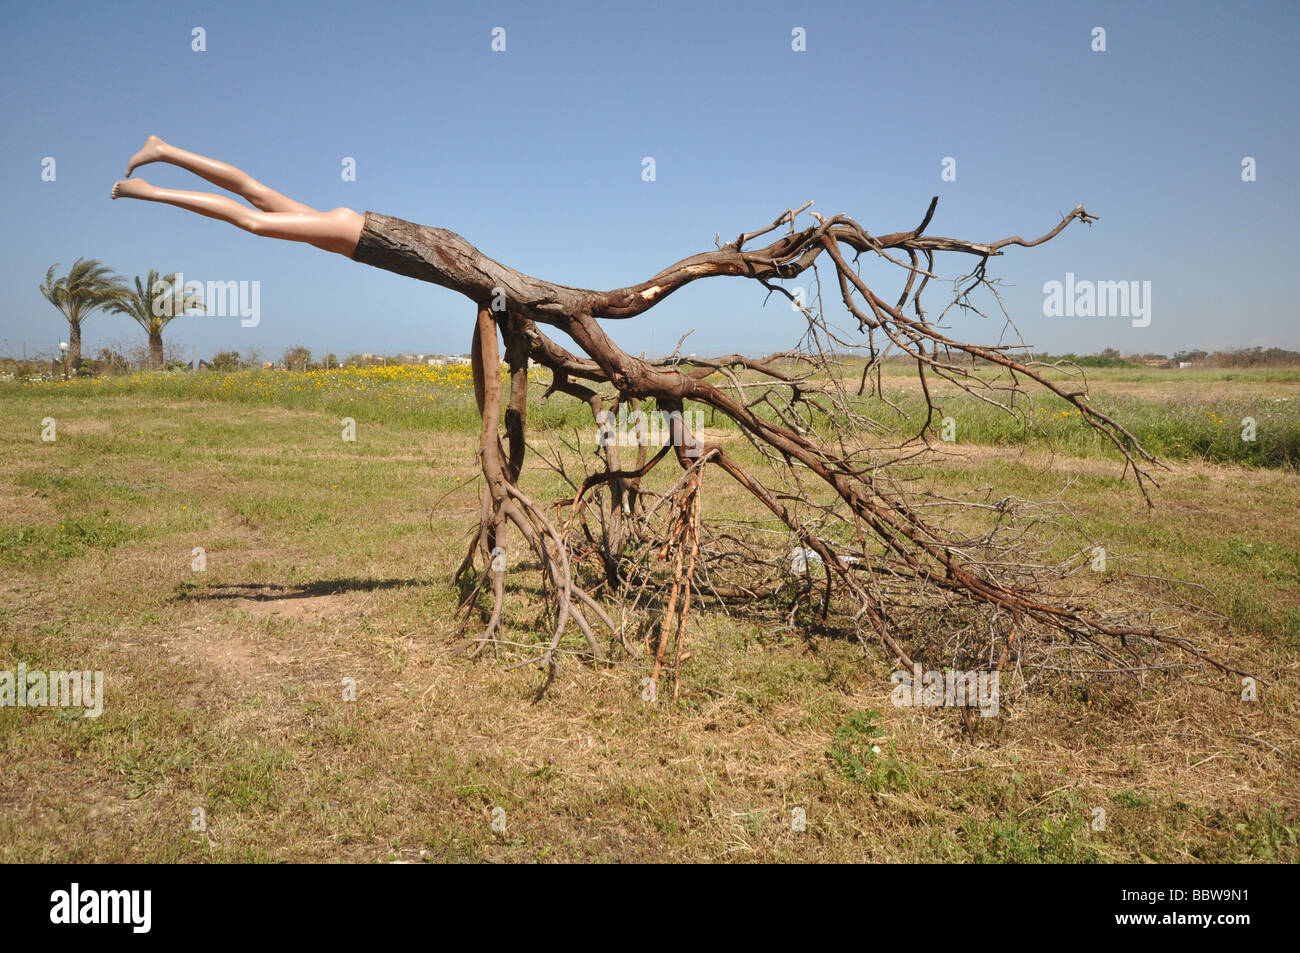 Israel Coastal Plains Arsuf Dina Park And Time to Displace 2009 Tree plastic mannequin By Tanya Priminger Stock Photo